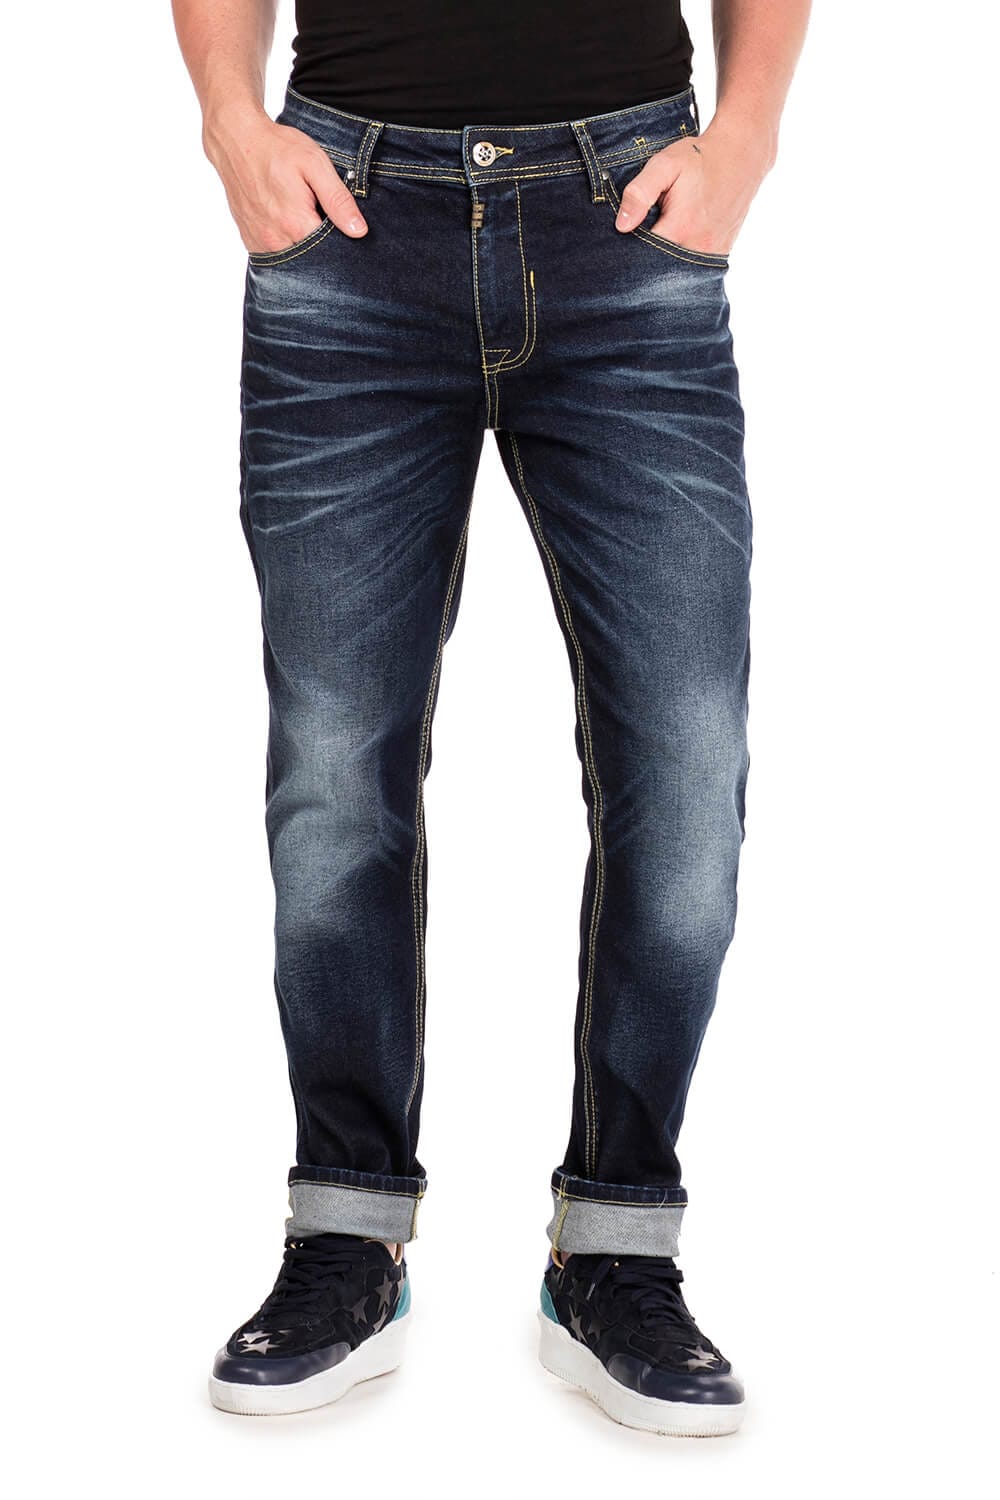 Cipo & Baxx Slim-fit-Jeans, im Washed-Look in Straight Fit